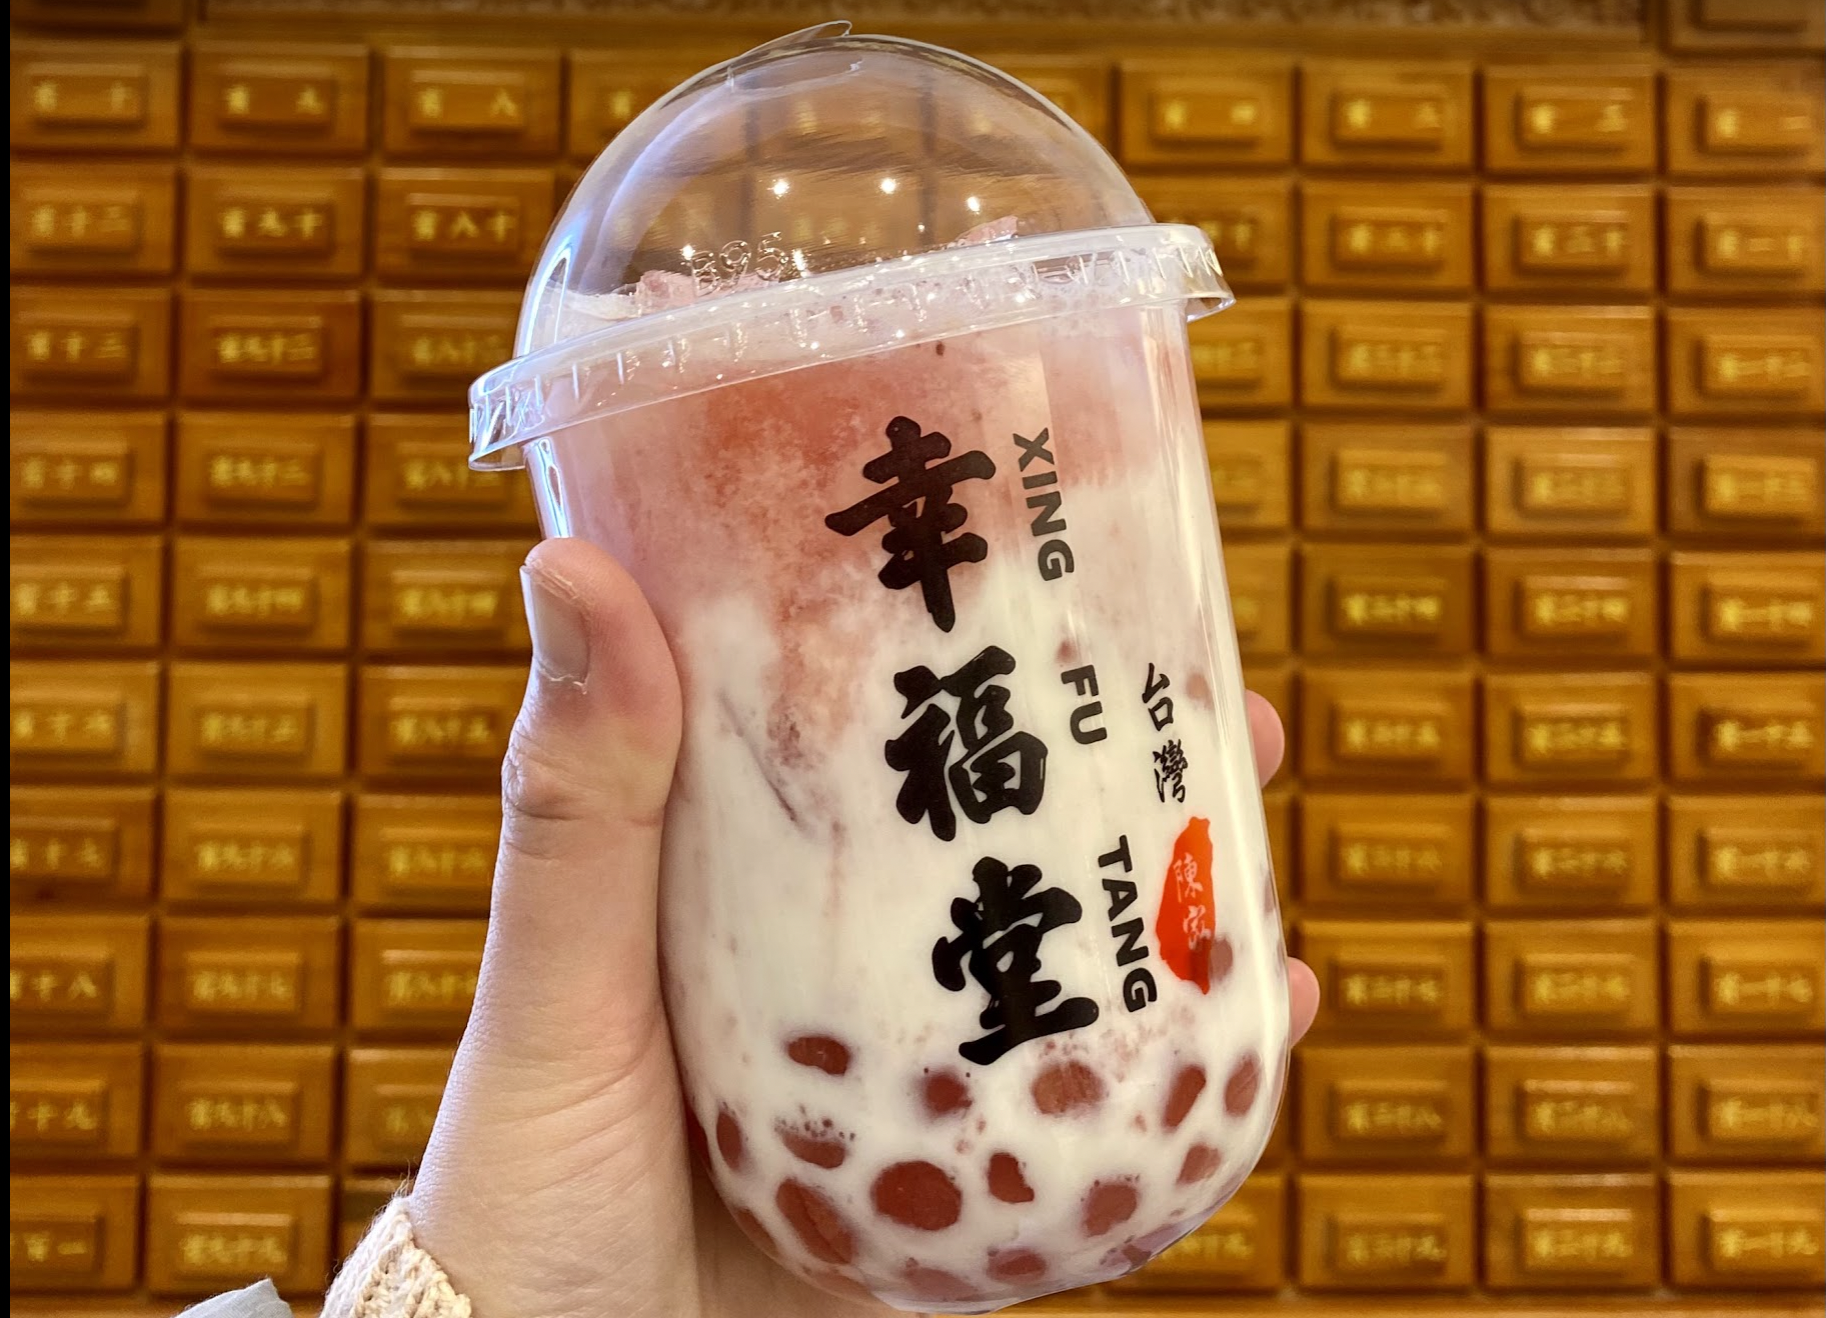 A white and pink bubble tea is held up by a hand.